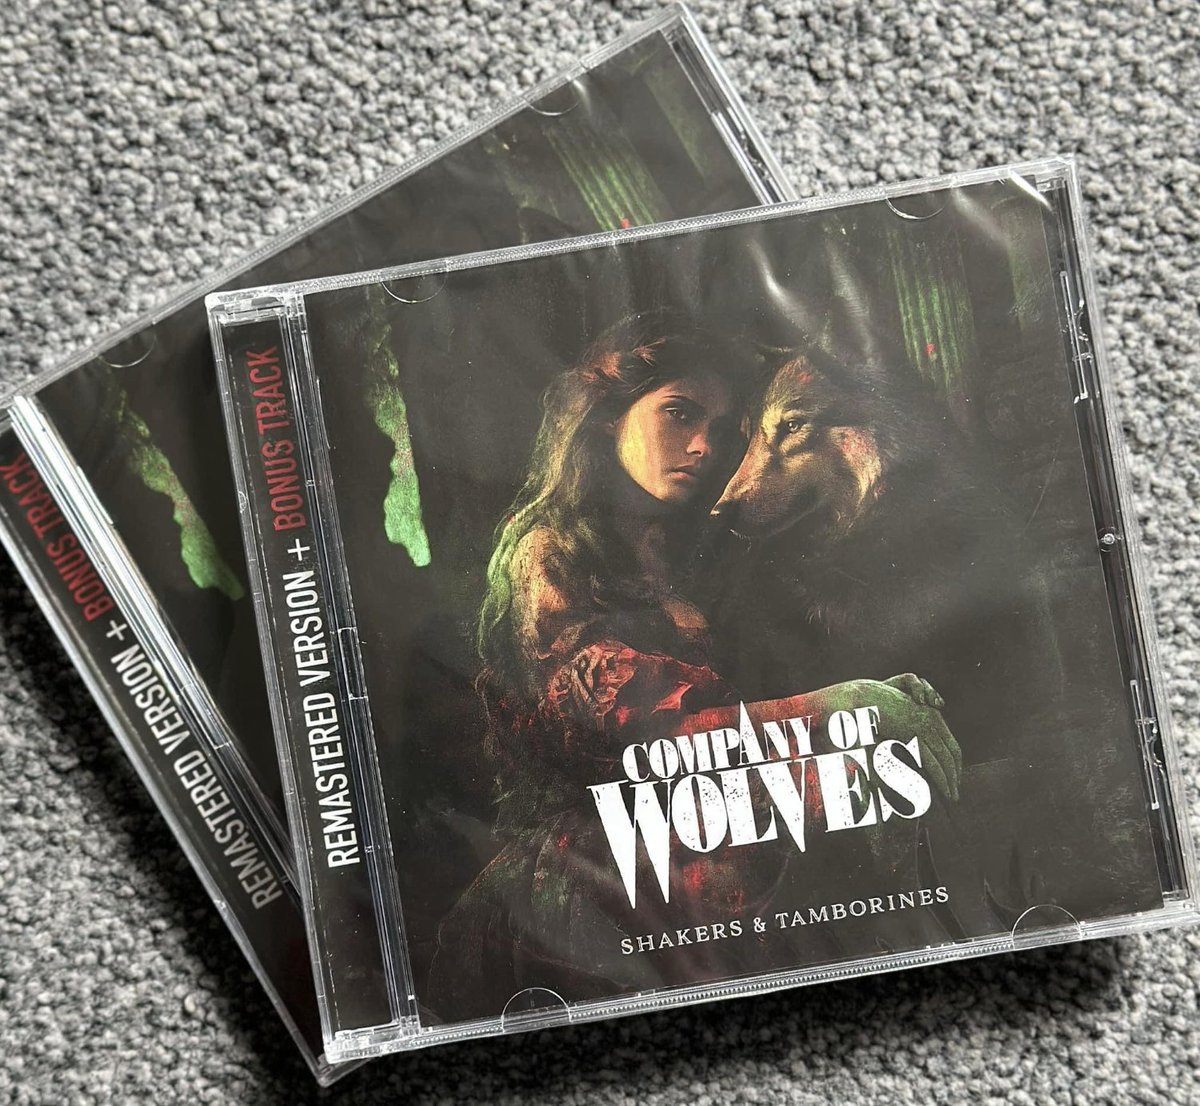 Company Of Wolves on CD! Bad Reputation has reissued our Shakers And Tamborines album - the demos that got us signed to Mercury Records in 1990. Includes a previously unreleased track, “Company Of Wolves”, the song that the band took its name from. badreputation.fr/epages/box2831…